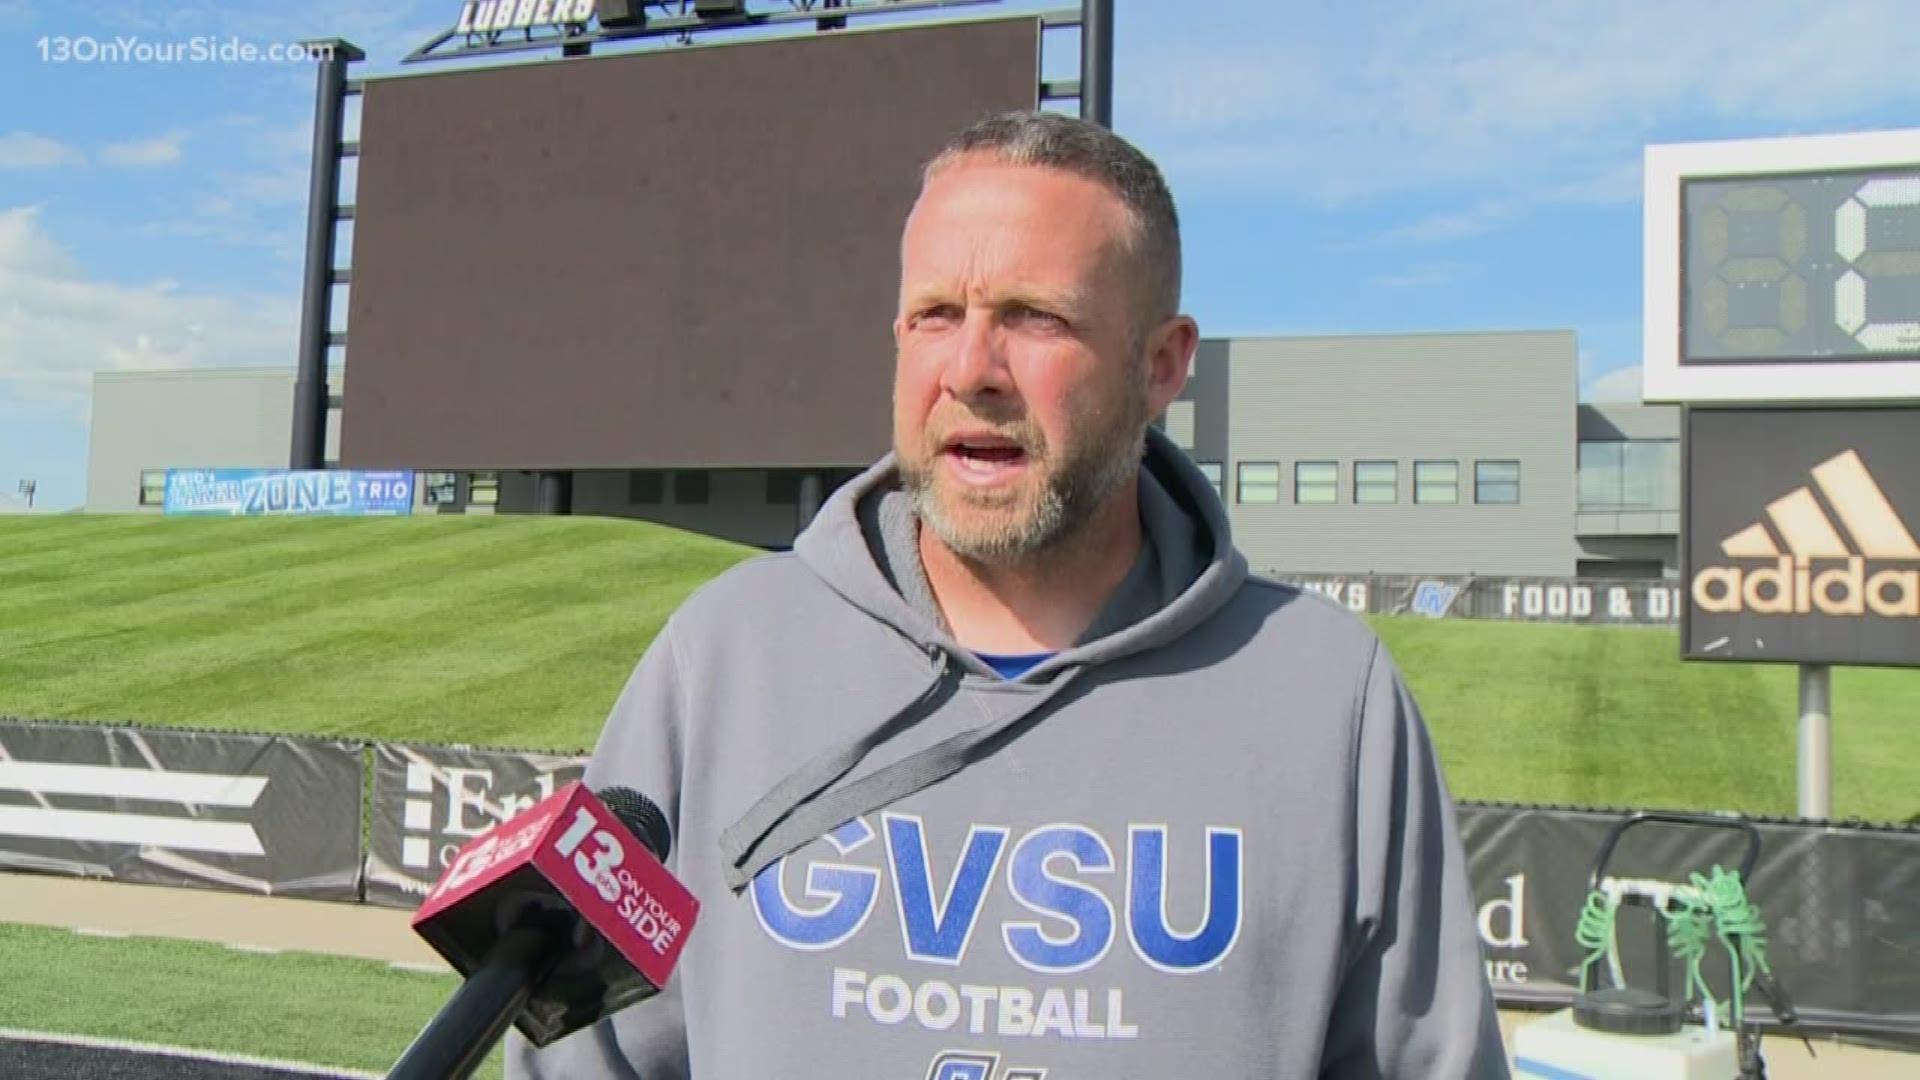 Despite the fact GVSU suffered its first loss of the season last week, head coach Matt Mitchell says they are not extra motivated to get back on track.